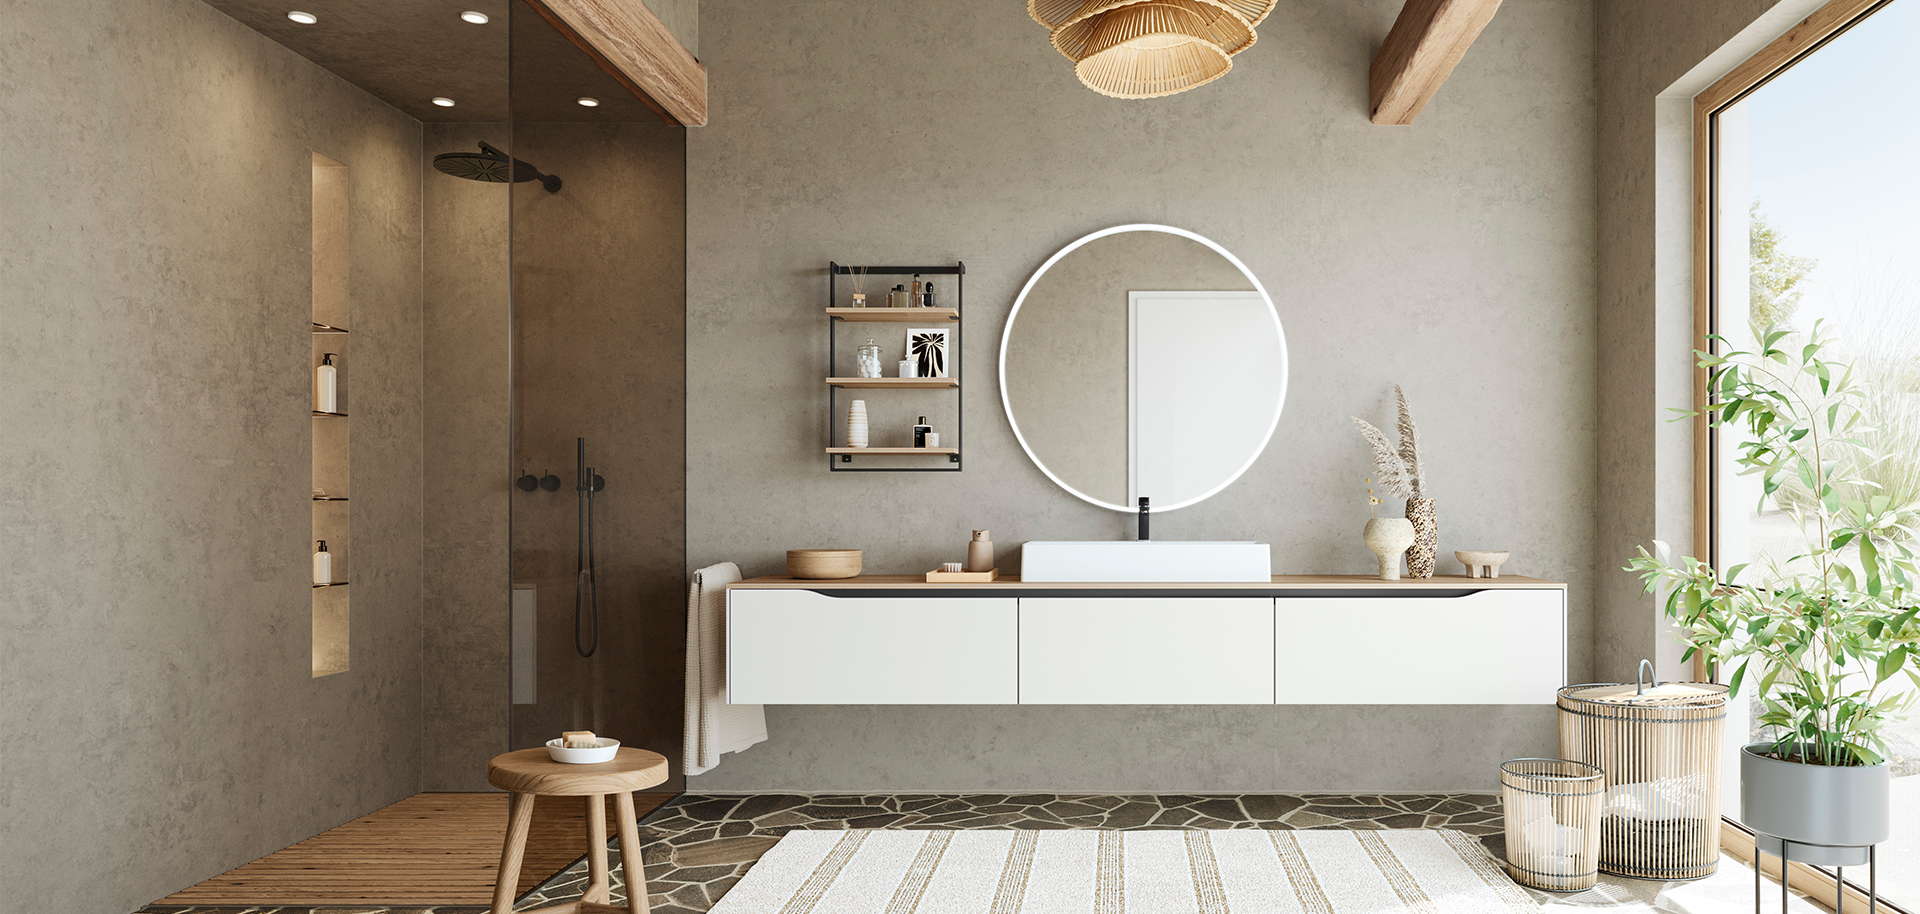 Minimalist bathroom design with a floating vanity, round mirror, and natural accents for a serene and stylish space.